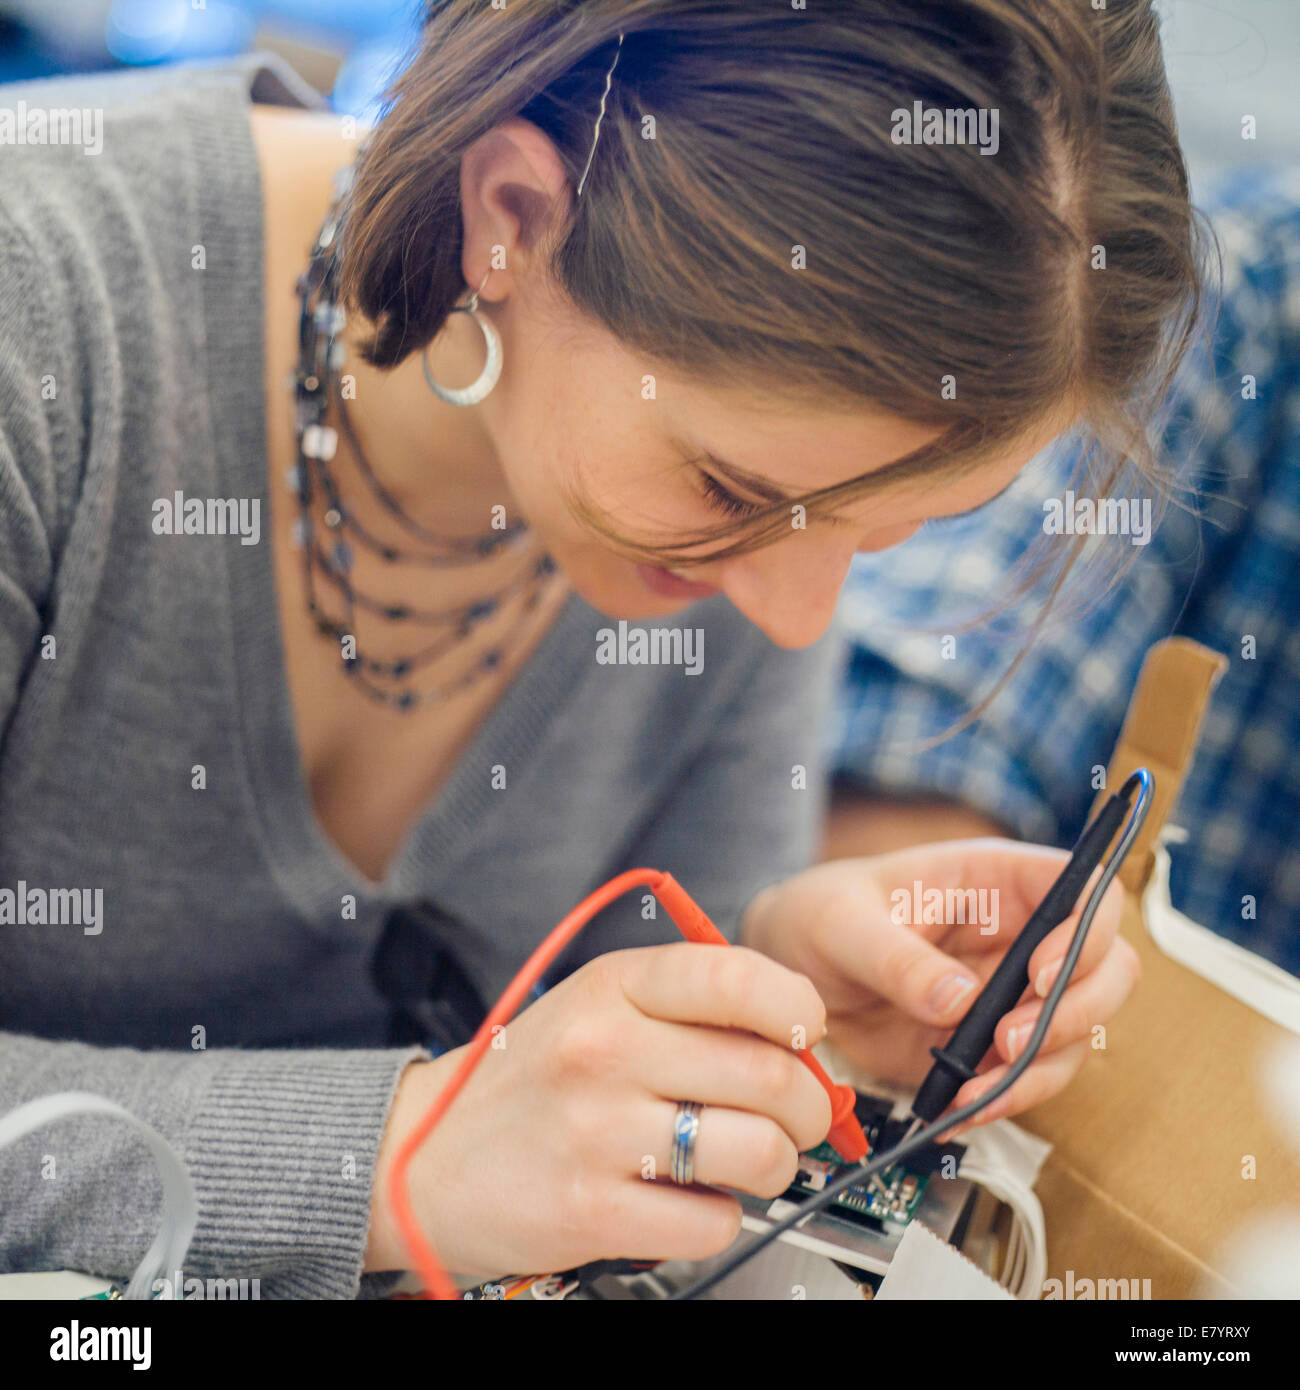 View of woman working with electric parts Stock Photo